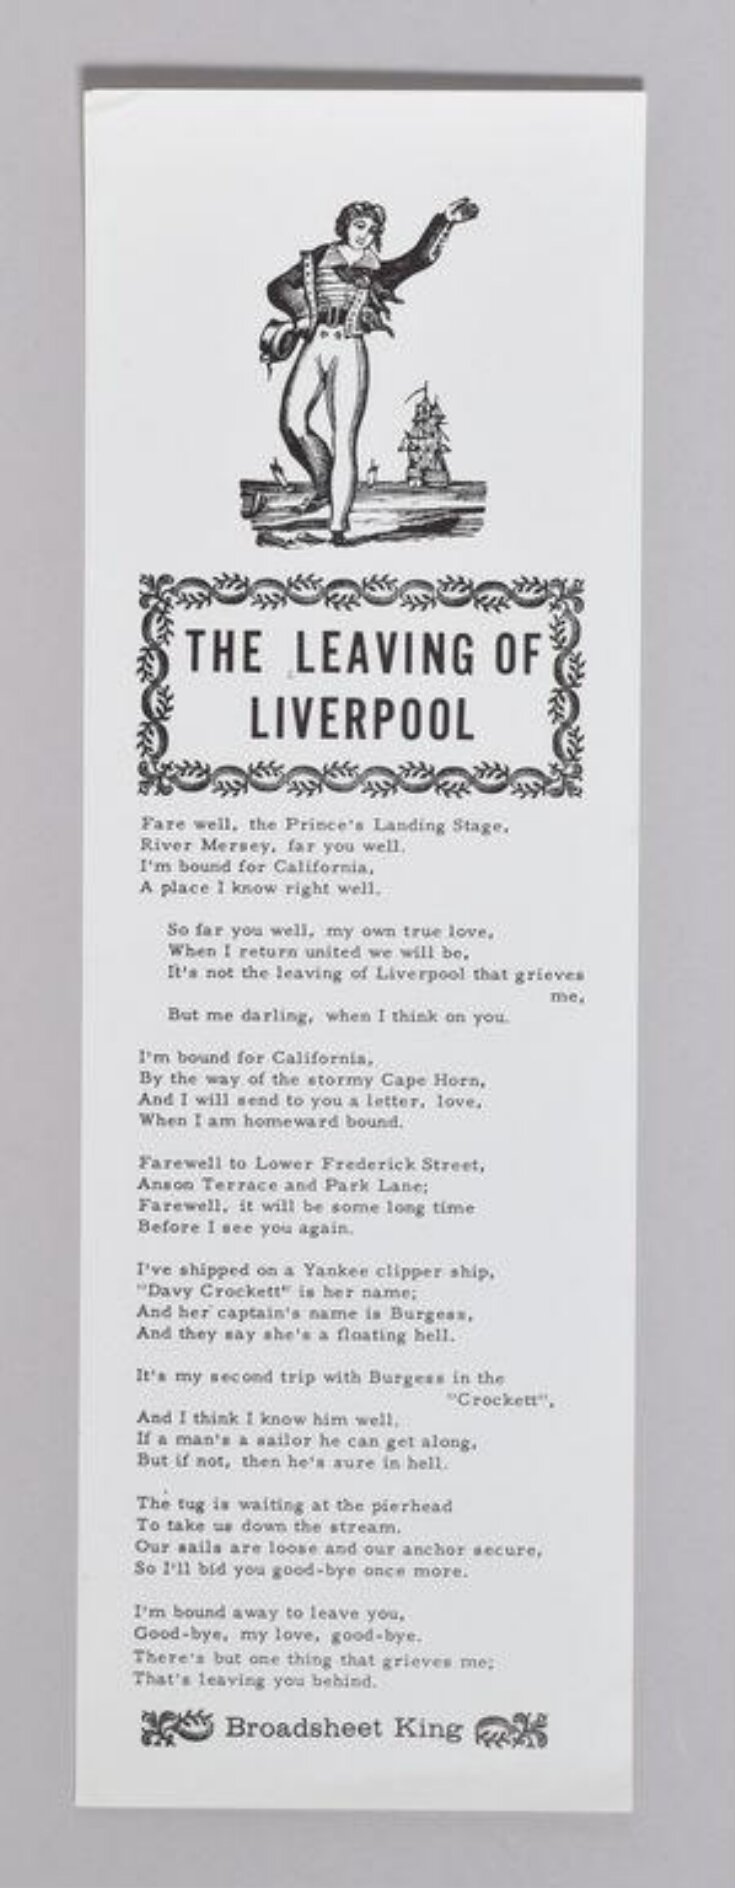 The leaving of Liverpool image